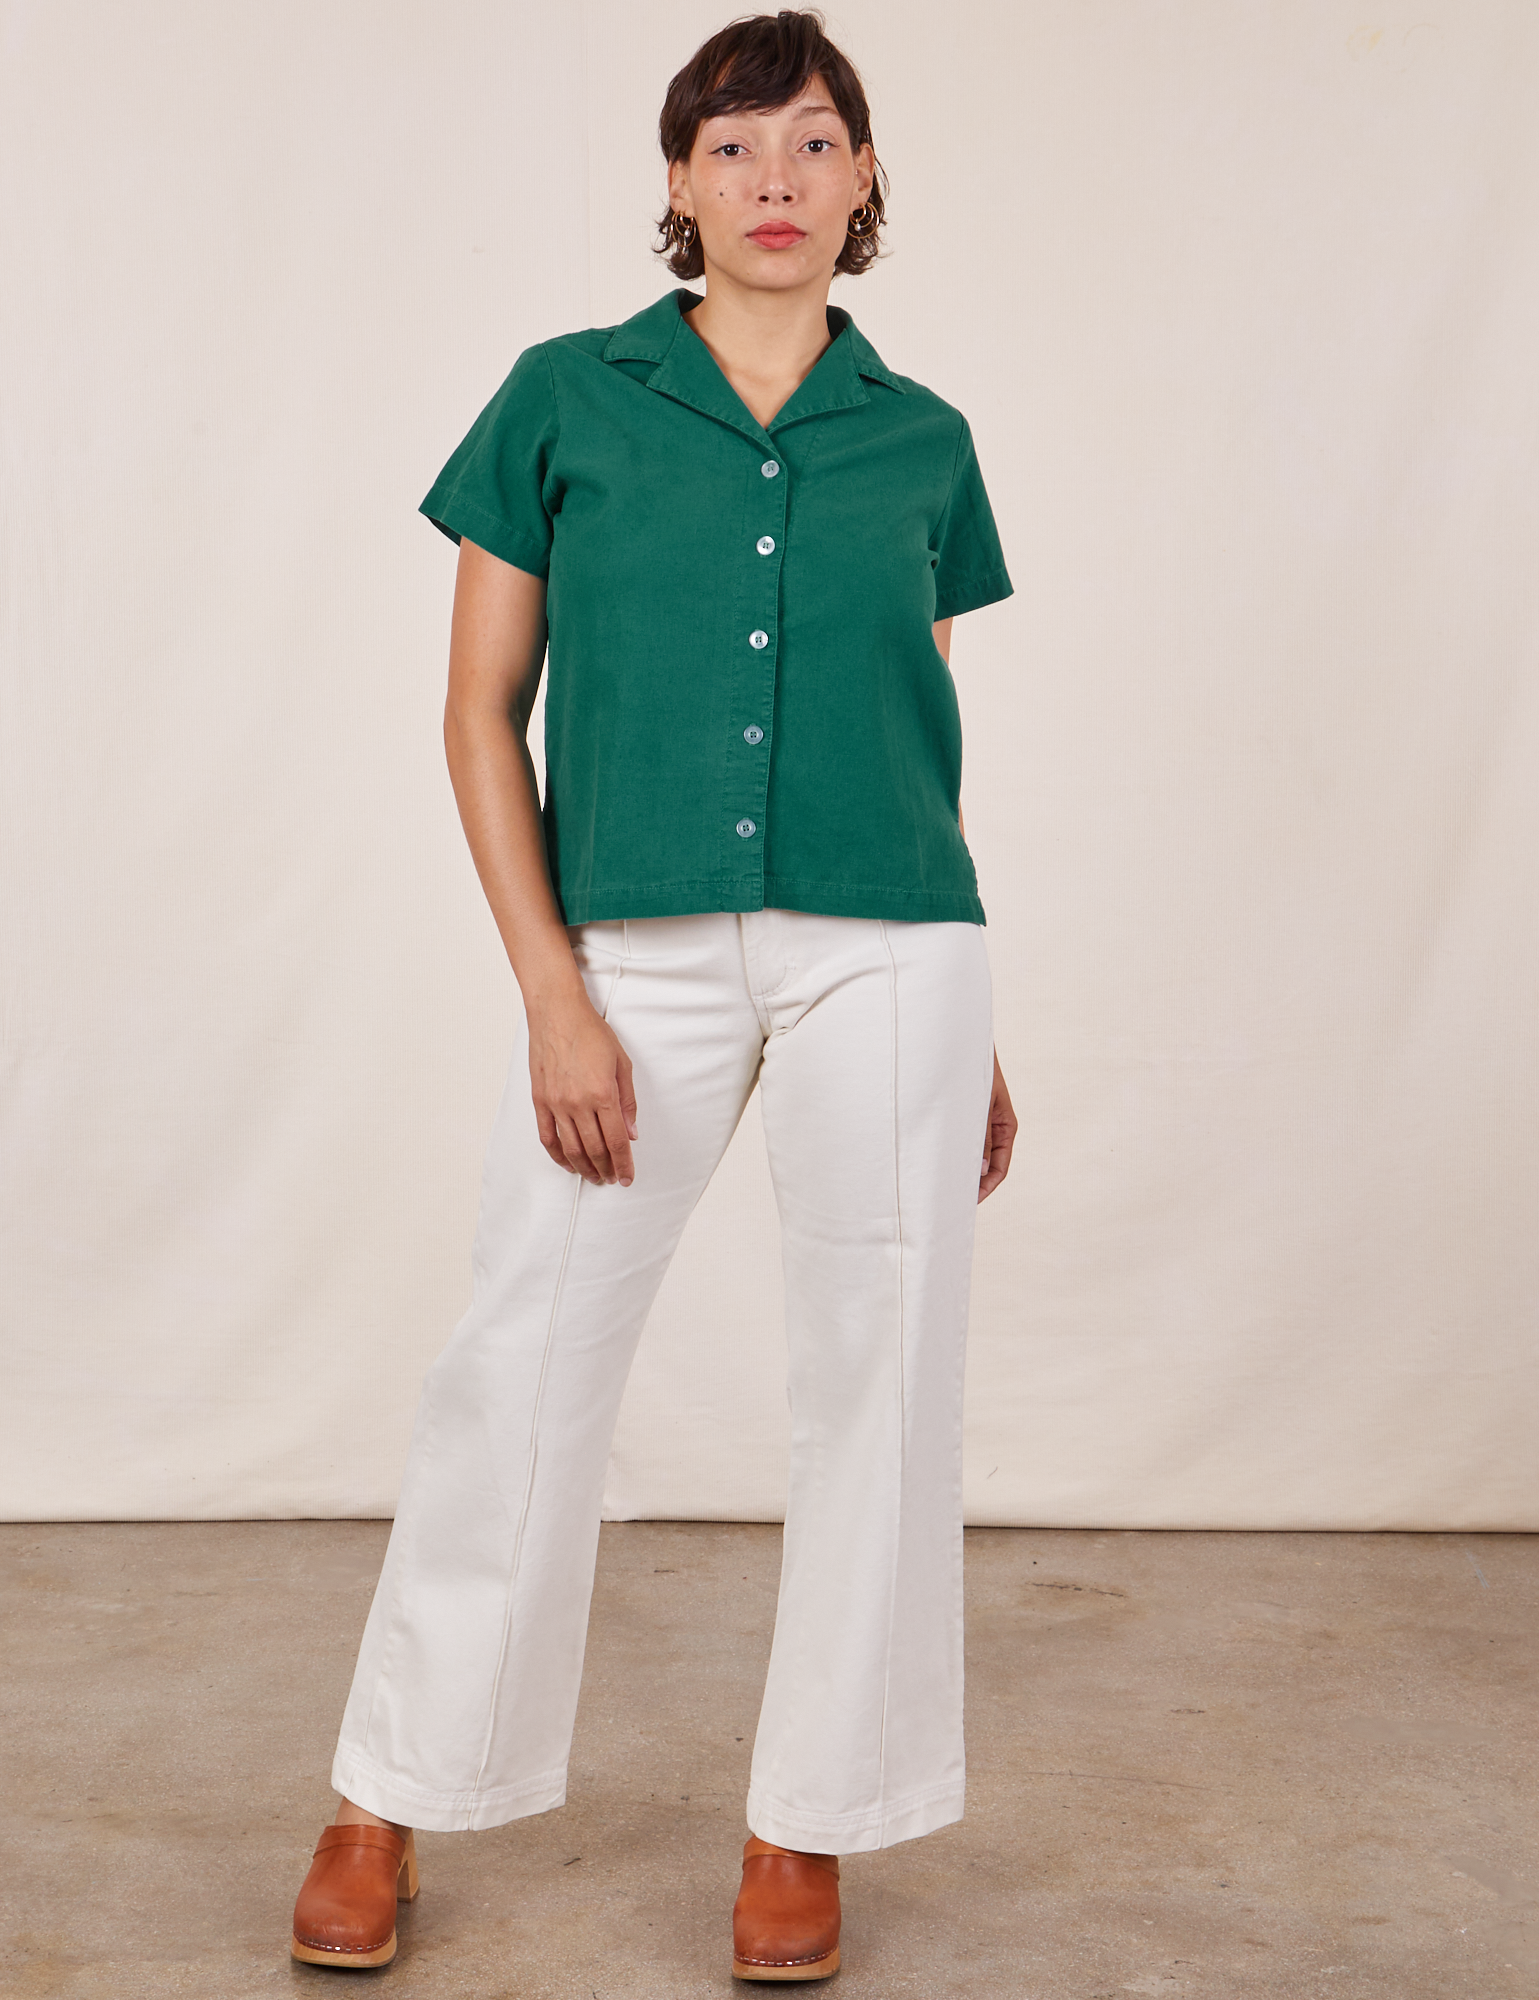 Tiara is wearing size XS Pantry Button-Up in Hunter Green paired with vintage off-white Western Pants